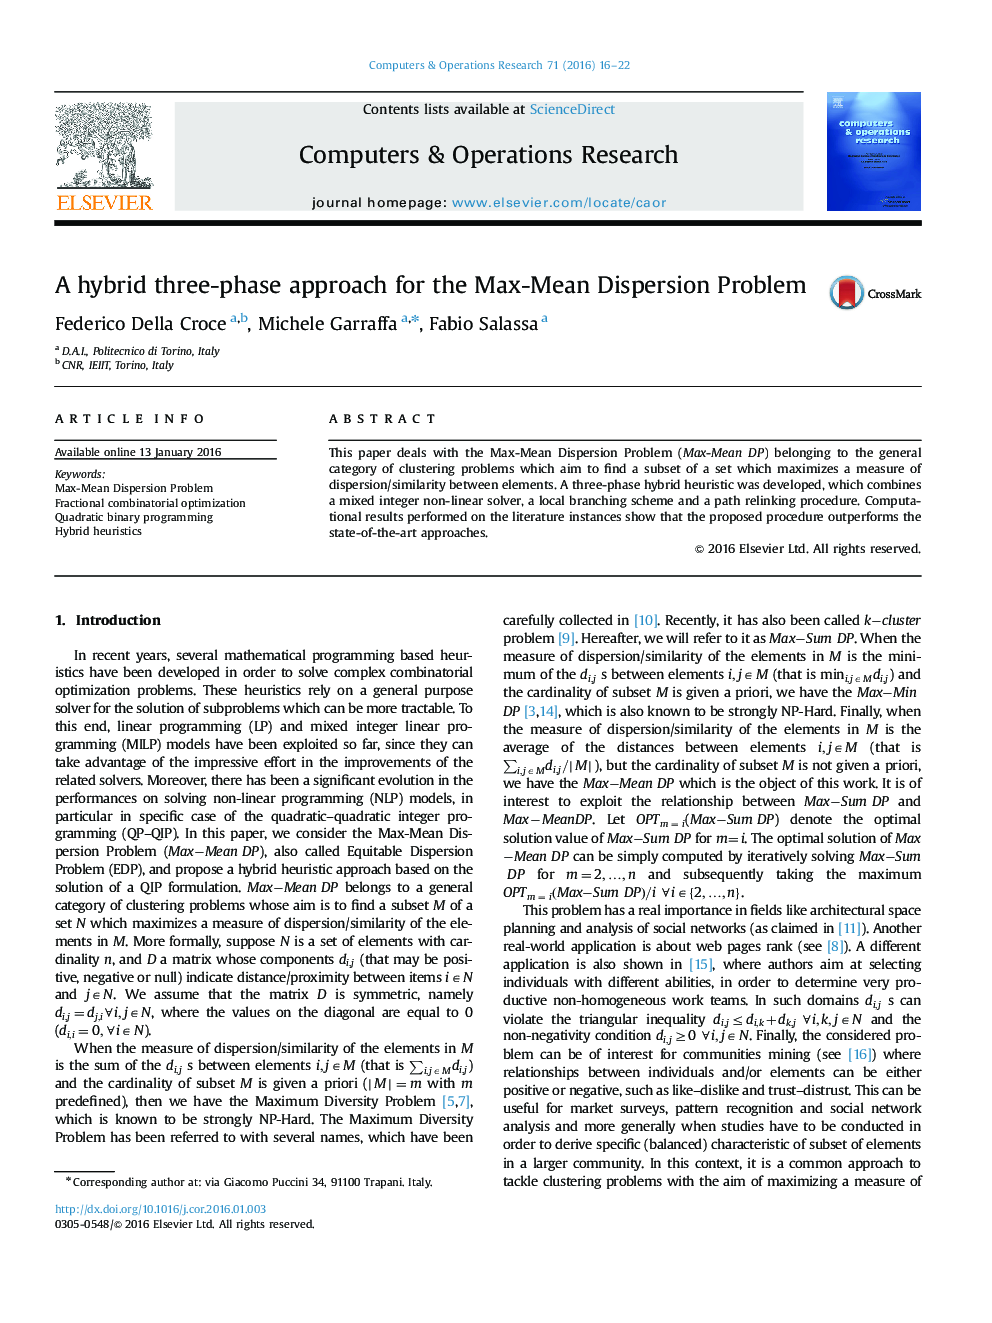 A hybrid three-phase approach for the Max-Mean Dispersion Problem